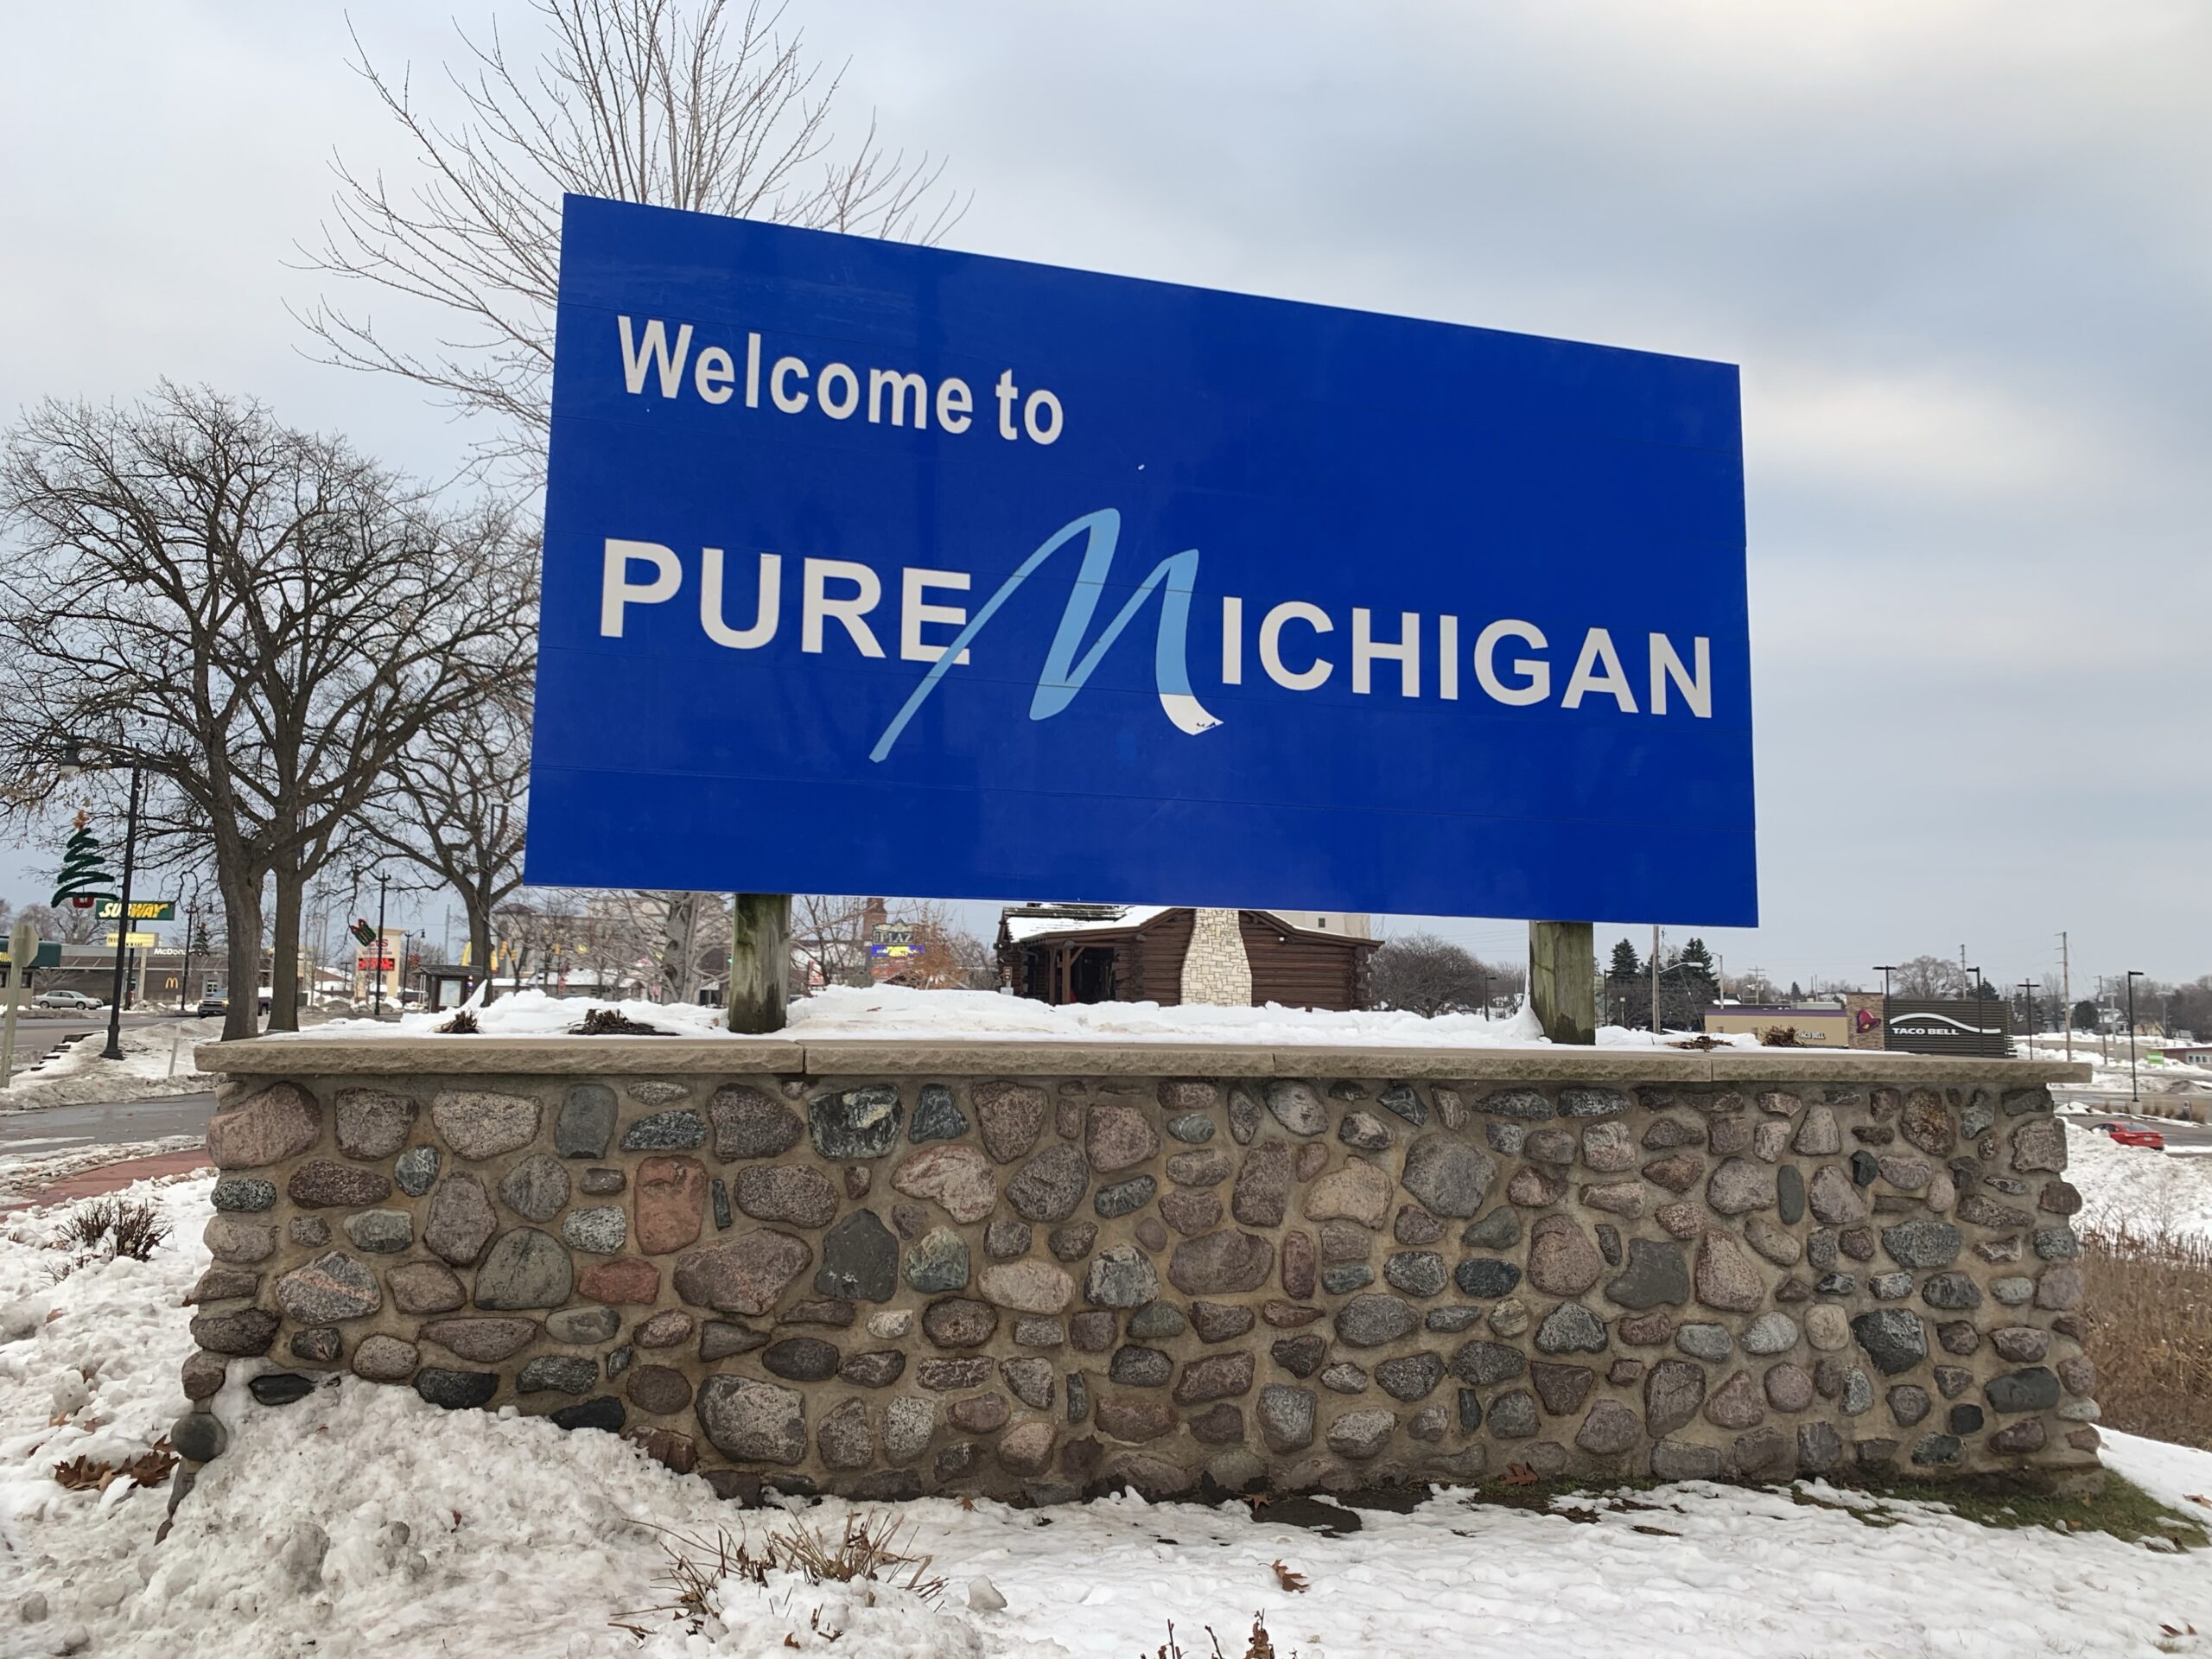 "Welcome to Pure Michigan" sign